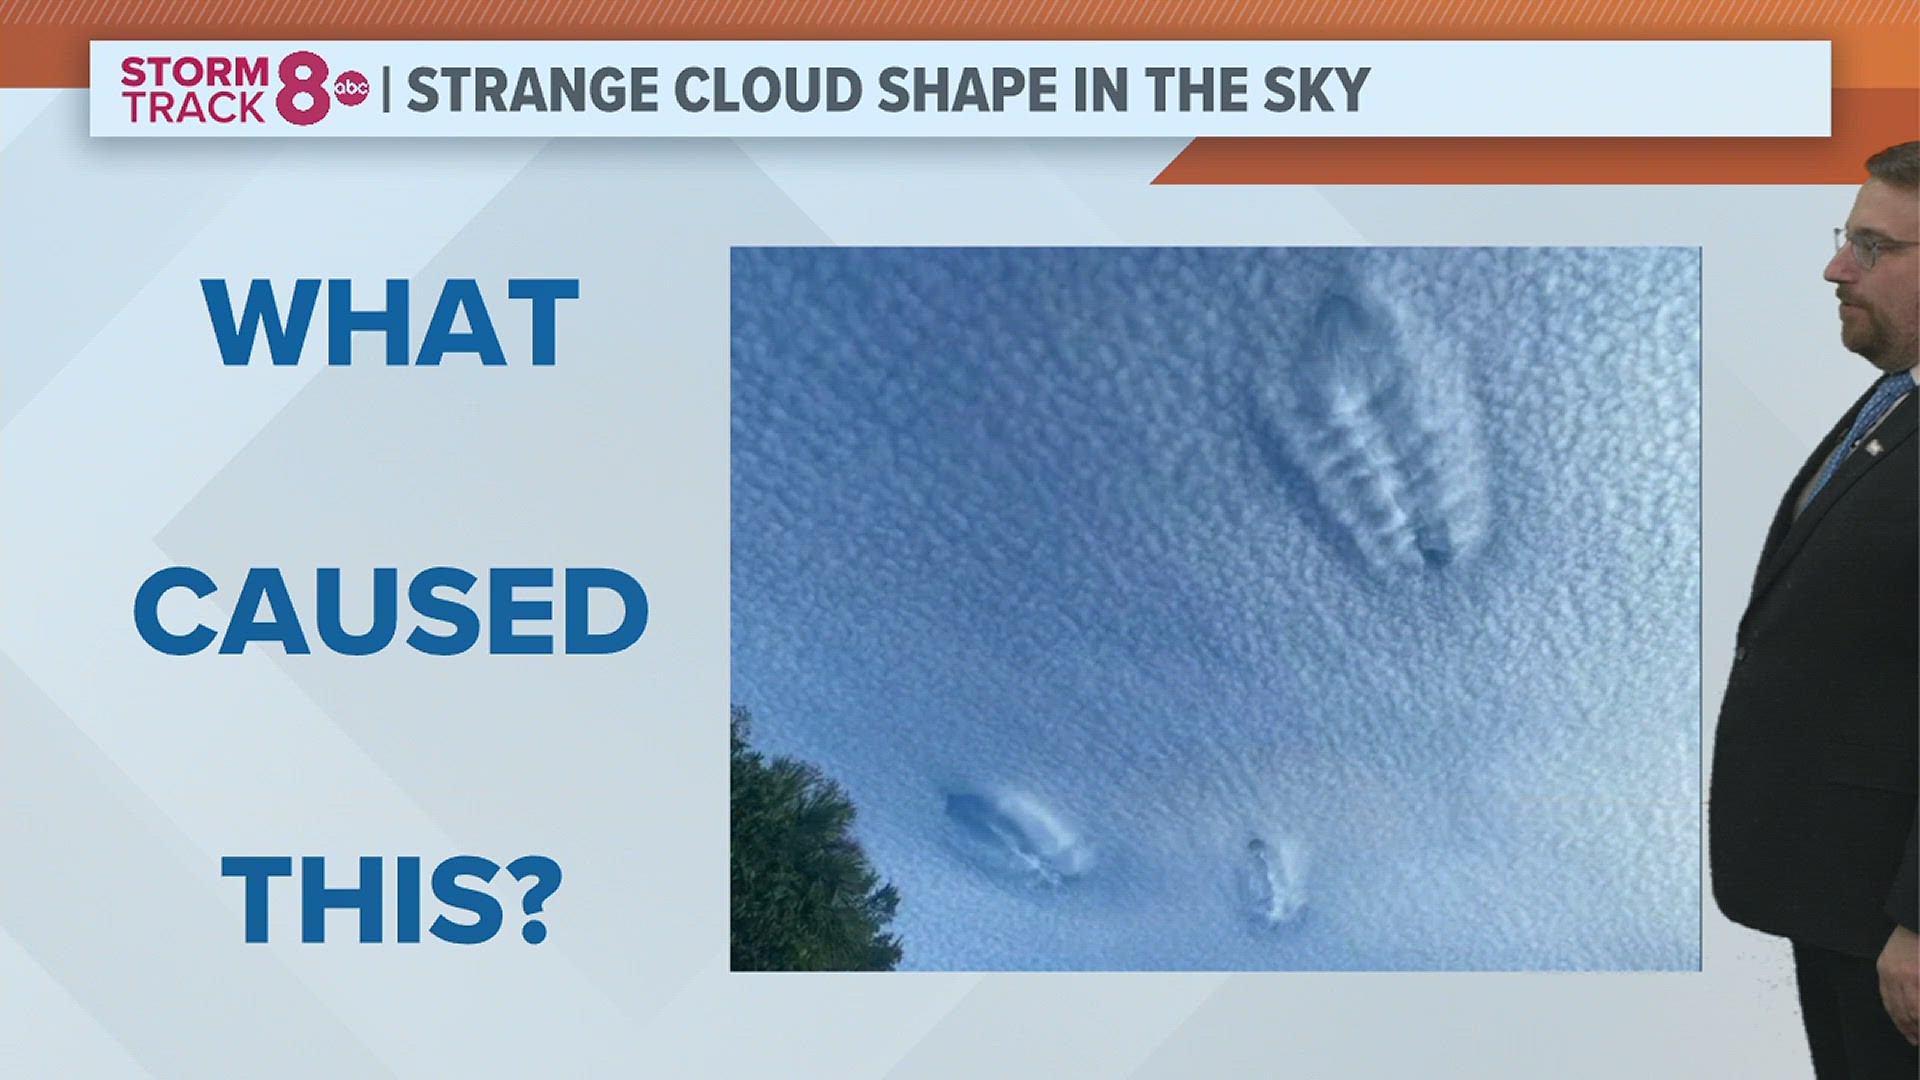 Hole punch clouds often form when suspended ice crystals are disturbed, suddenly falling from the sky.